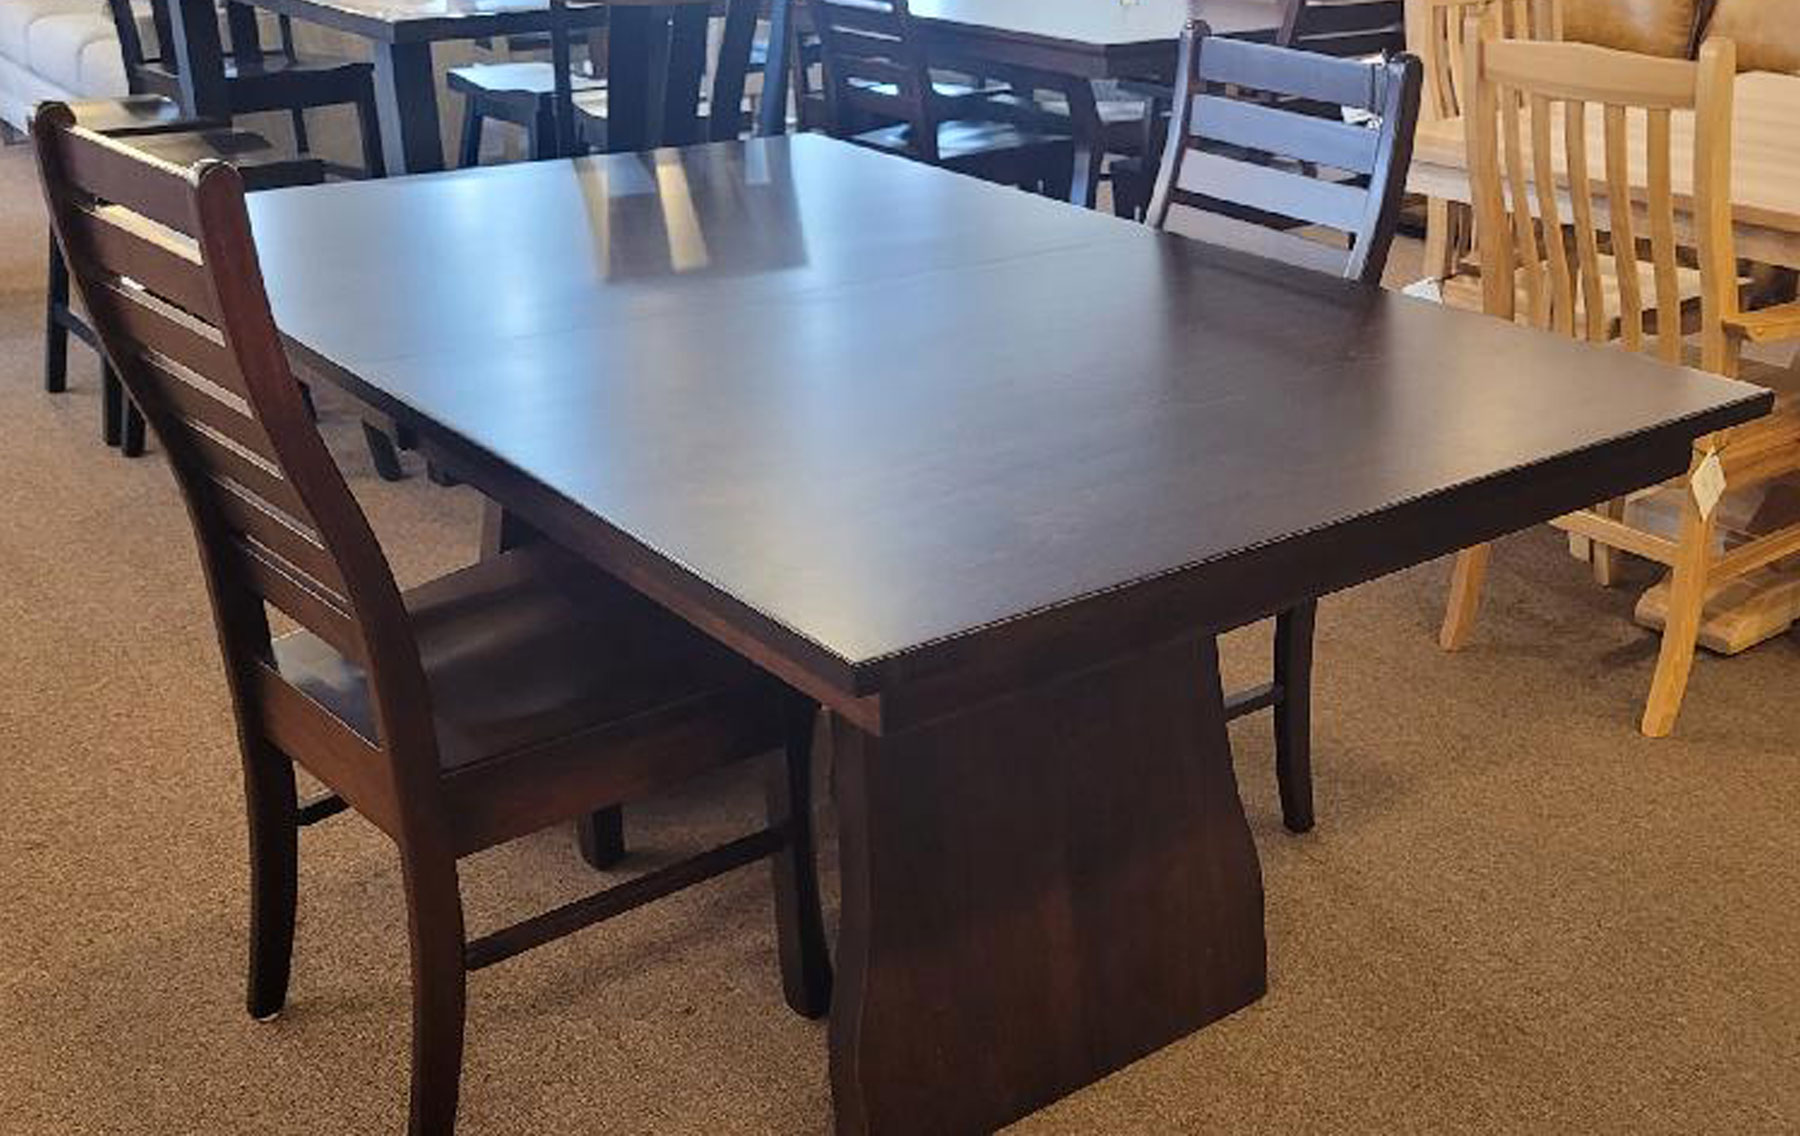 Lyndon 42 x 66 Double Pedestal Table with (2) Leaf Extensions in Brown Maple